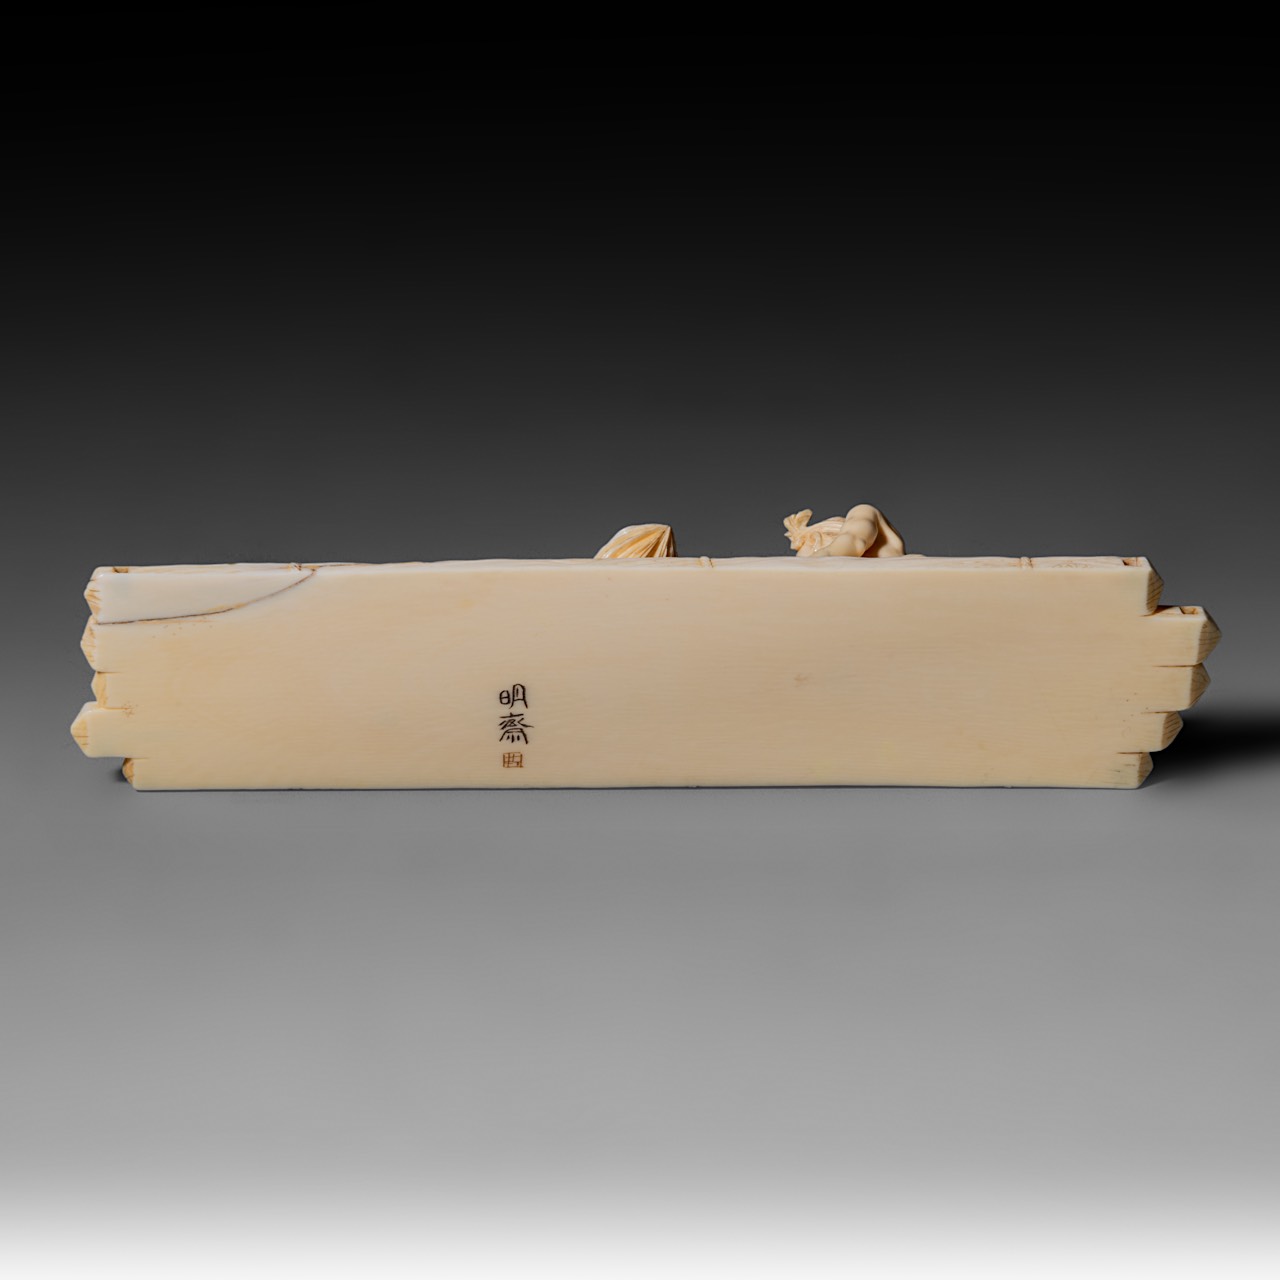 Two Japanese Meiji-period (1868-1912) ivory okimono; one depicts a man rowing a raft while a child s - Image 11 of 19